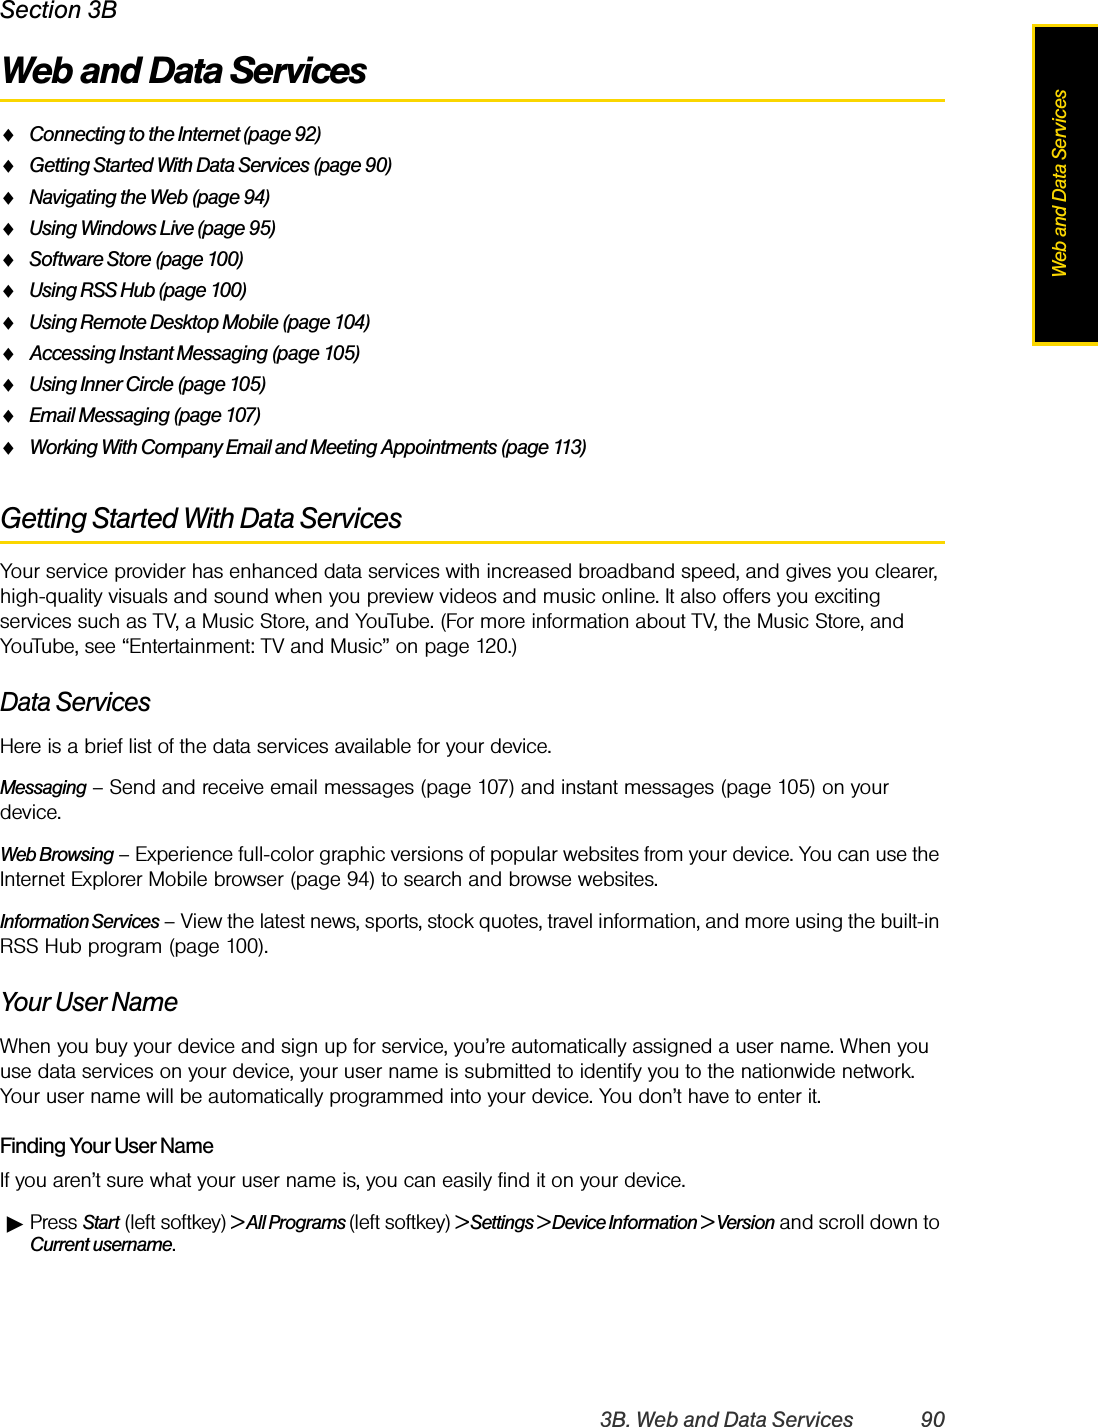 3B. Web and Data Services 90Web and Data ServicesSection 3BWeb and Data ServicesࡗConnecting to the Internet (page 92)ࡗGetting Started With Data Services (page 90)ࡗNavigating the Web (page 94)ࡗUsing Windows Live (page 95)ࡗSoftware Store (page 100)ࡗUsing RSS Hub (page 100)ࡗUsing Remote Desktop Mobile (page 104)ࡗAccessing Instant Messaging (page 105)ࡗUsing Inner Circle (page 105)ࡗEmail Messaging (page 107)ࡗWorking With Company Email and Meeting Appointments (page 113)Getting Started With Data ServicesYour service provider has enhanced data services with increased broadband speed, and gives you clearer, high-quality visuals and sound when you preview videos and music online. It also offers you exciting services such as TV, a Music Store, and YouTube. (For more information about TV, the Music Store, and YouTube, see “Entertainment: TV and Music” on page 120.)Data ServicesHere is a brief list of the data services available for your device. Messaging – Send and receive email messages (page 107) and instant messages (page 105) on your device.Web Browsing – Experience full-color graphic versions of popular websites from your device. You can use the Internet Explorer Mobile browser (page 94) to search and browse websites.Information Services – View the latest news, sports, stock quotes, travel information, and more using the built-in RSS Hub program (page 100).Your User NameWhen you buy your device and sign up for service, you’re automatically assigned a user name. When you use data services on your device, your user name is submitted to identify you to the nationwide network. Your user name will be automatically programmed into your device. You don’t have to enter it.Finding Your User NameIf you aren’t sure what your user name is, you can easily find it on your device.ᮣPress Start (left softkey) &gt; All Programs (left softkey) &gt; Settings &gt; Device Information &gt; Version and scroll down to Current username.